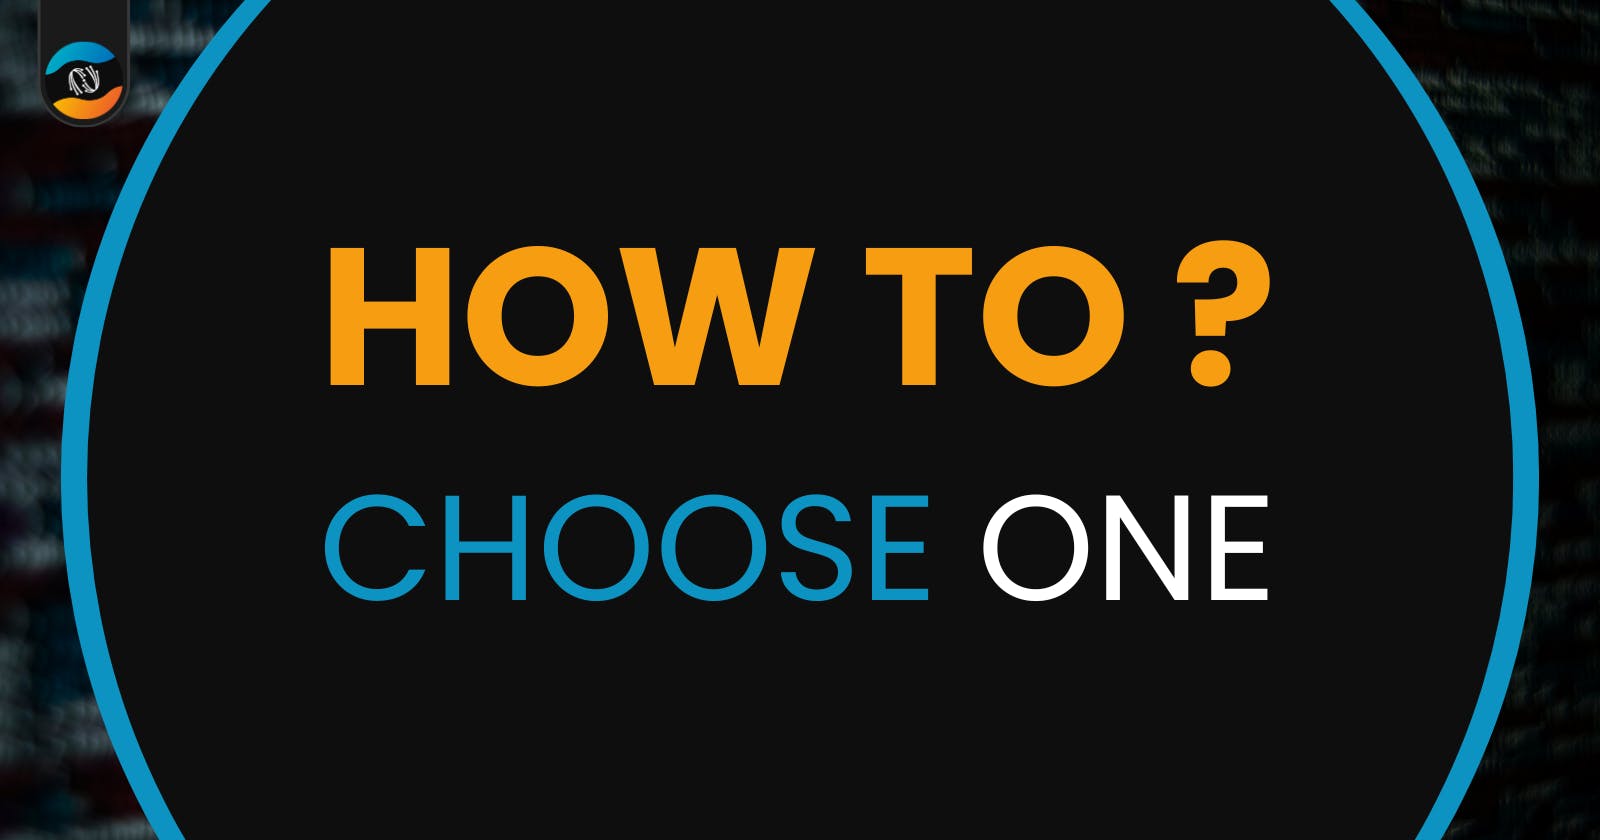 How to Choose A Perfect Linux Distribution?